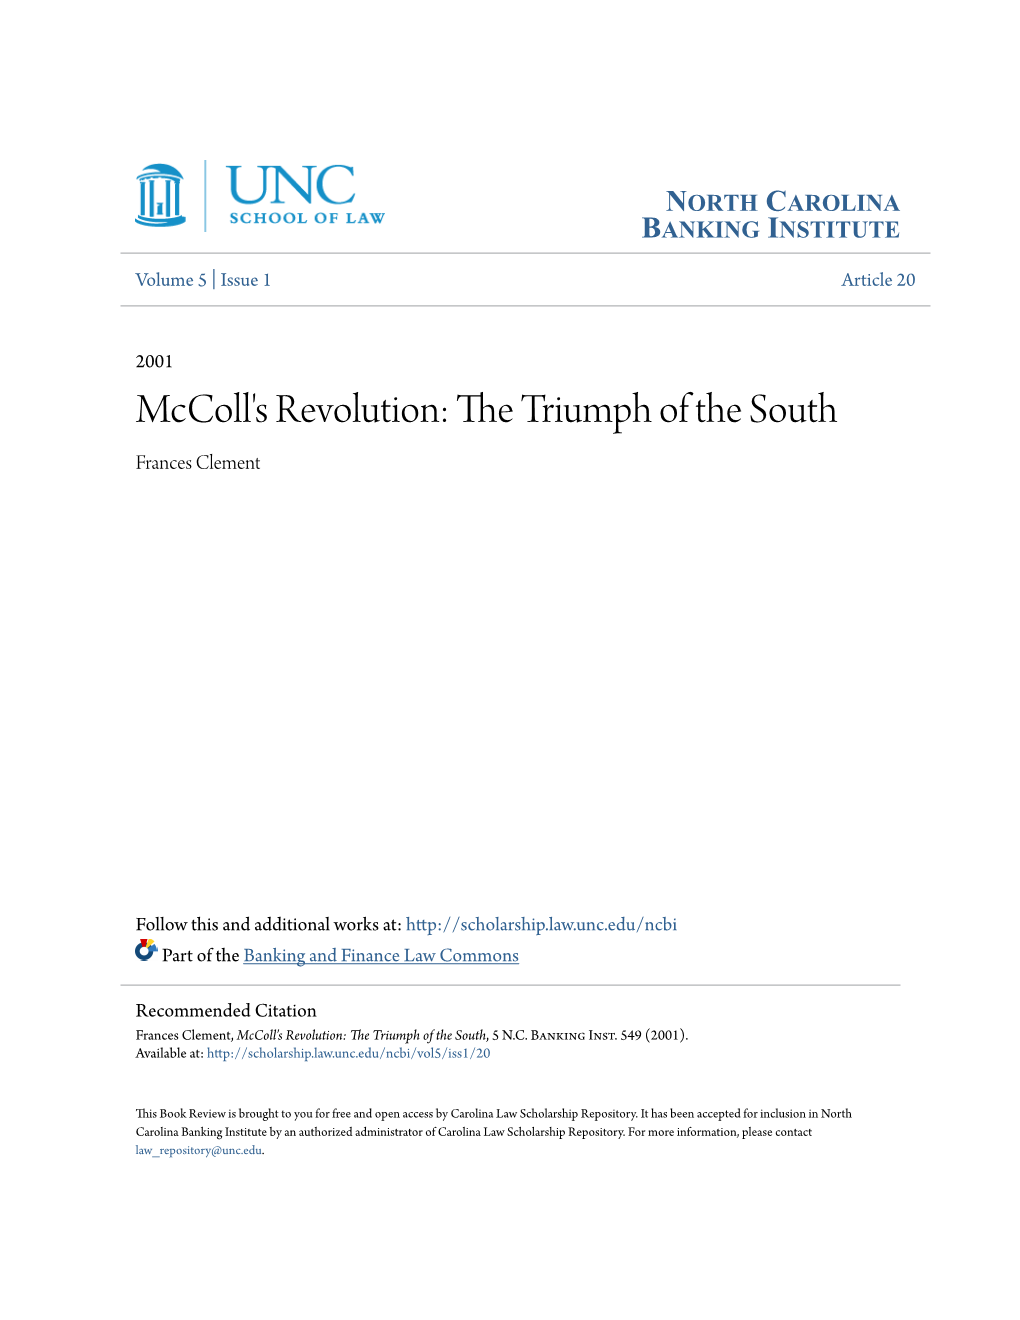 Mccoll's Revolution: the Rt Iumph of the South Frances Clement